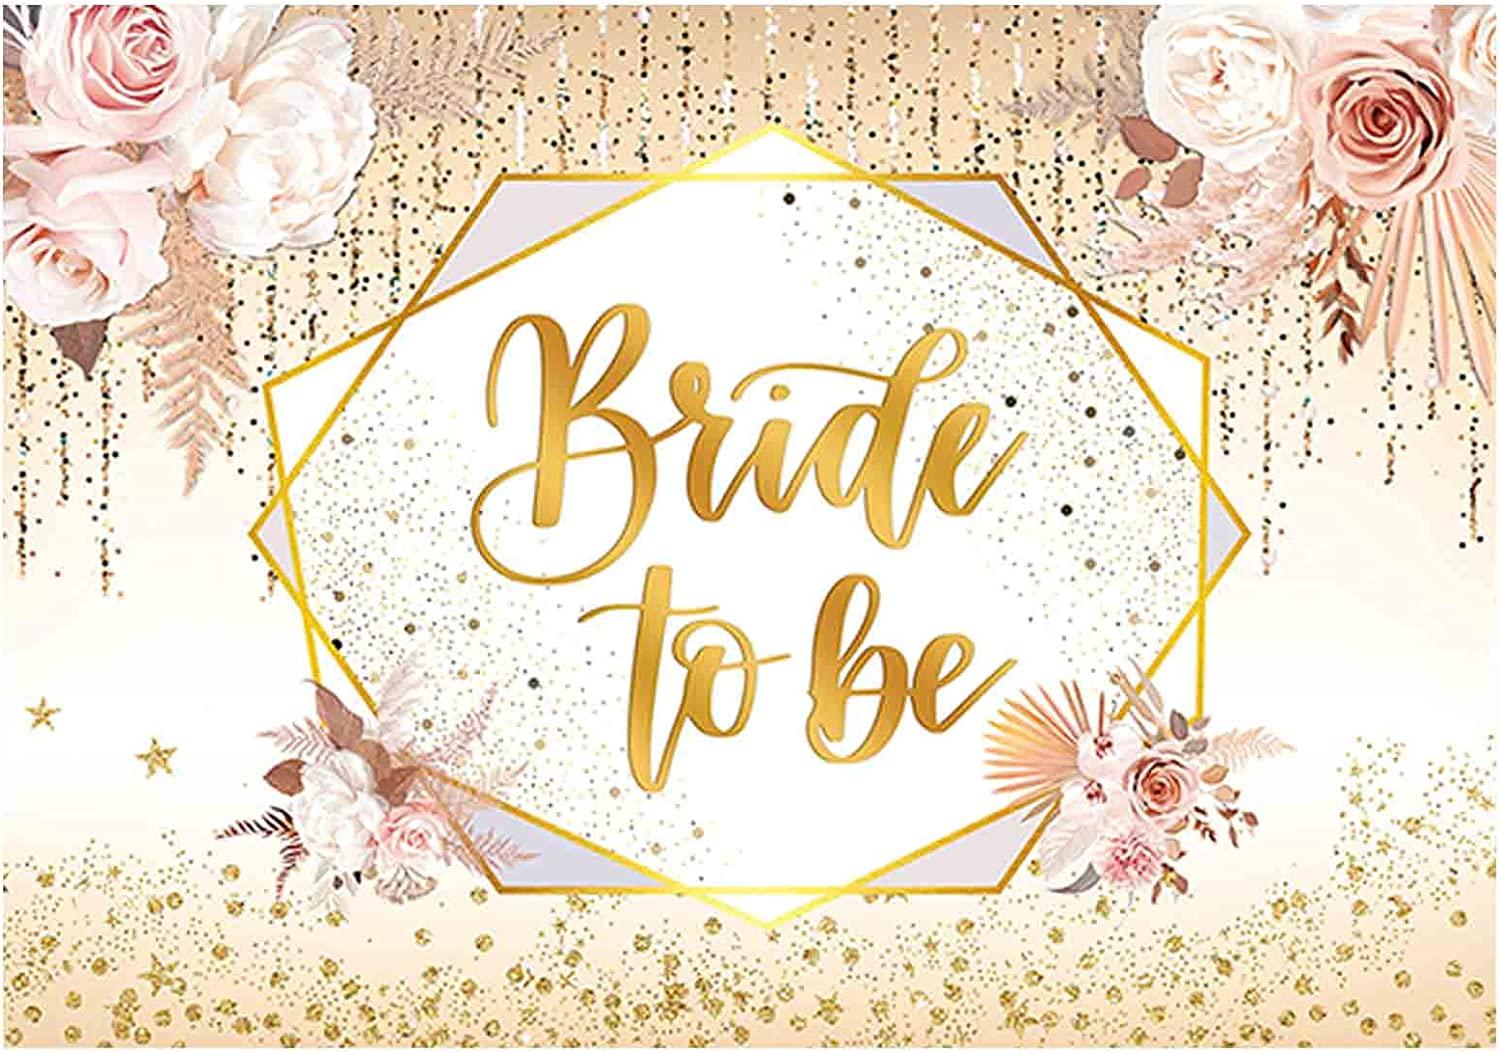 Boho Bride to Be Backdrop Bridal Shower Engagement Wedding Miss to Mrs Party Supplies - Decotree.co Online Shop